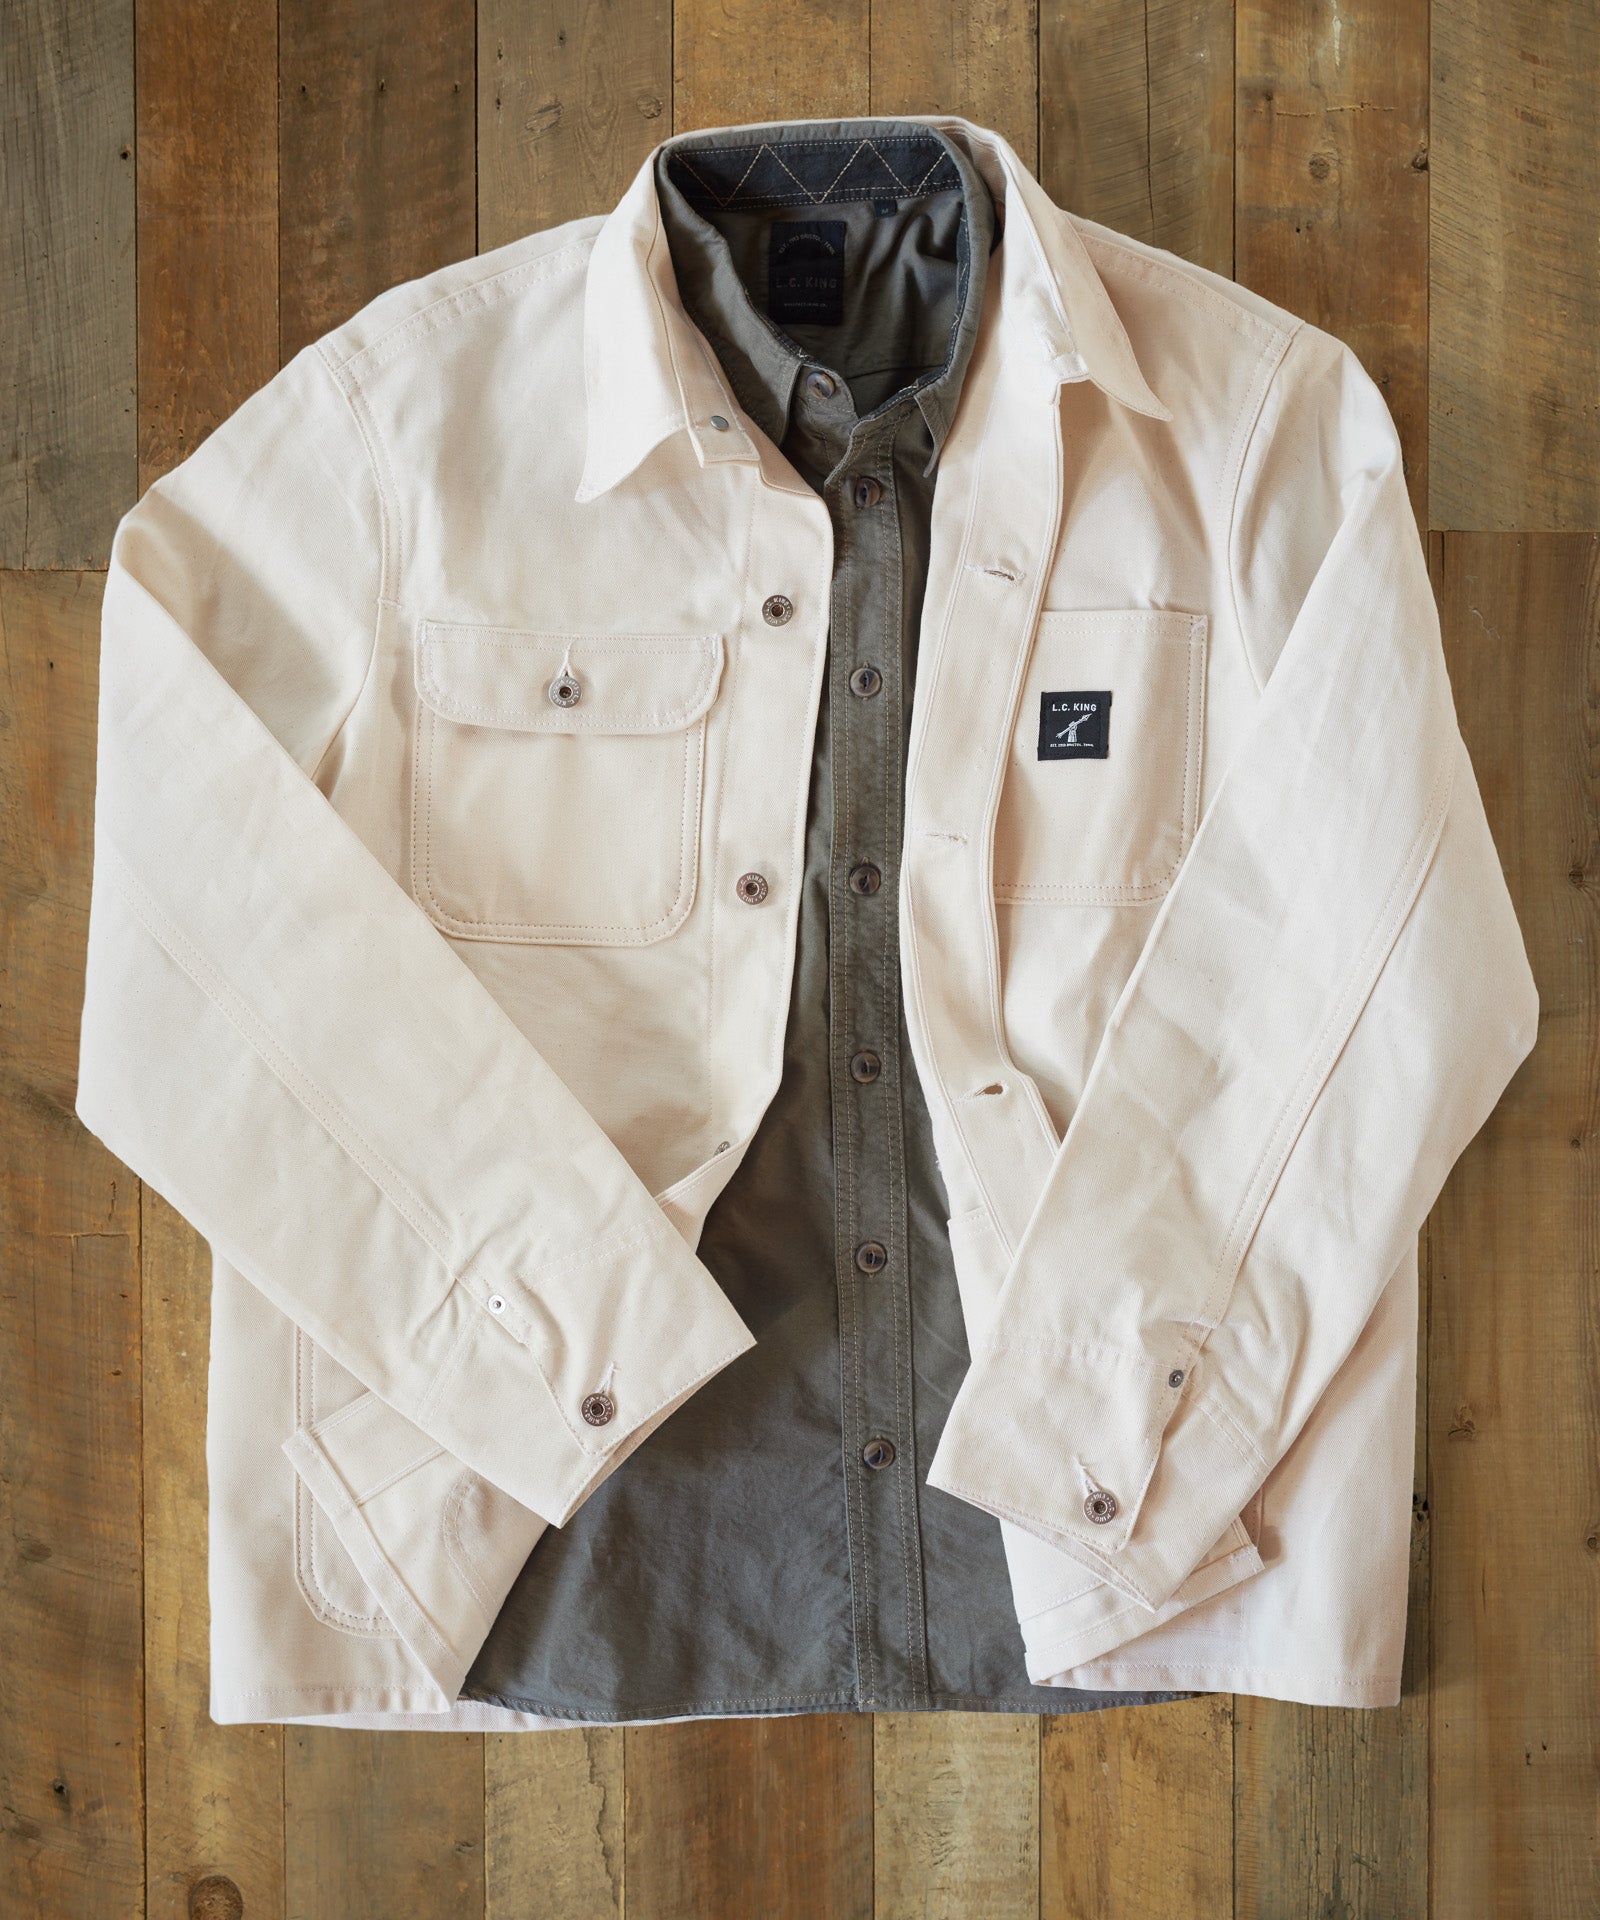 50% OFF: LC King White Drill Chore Coat